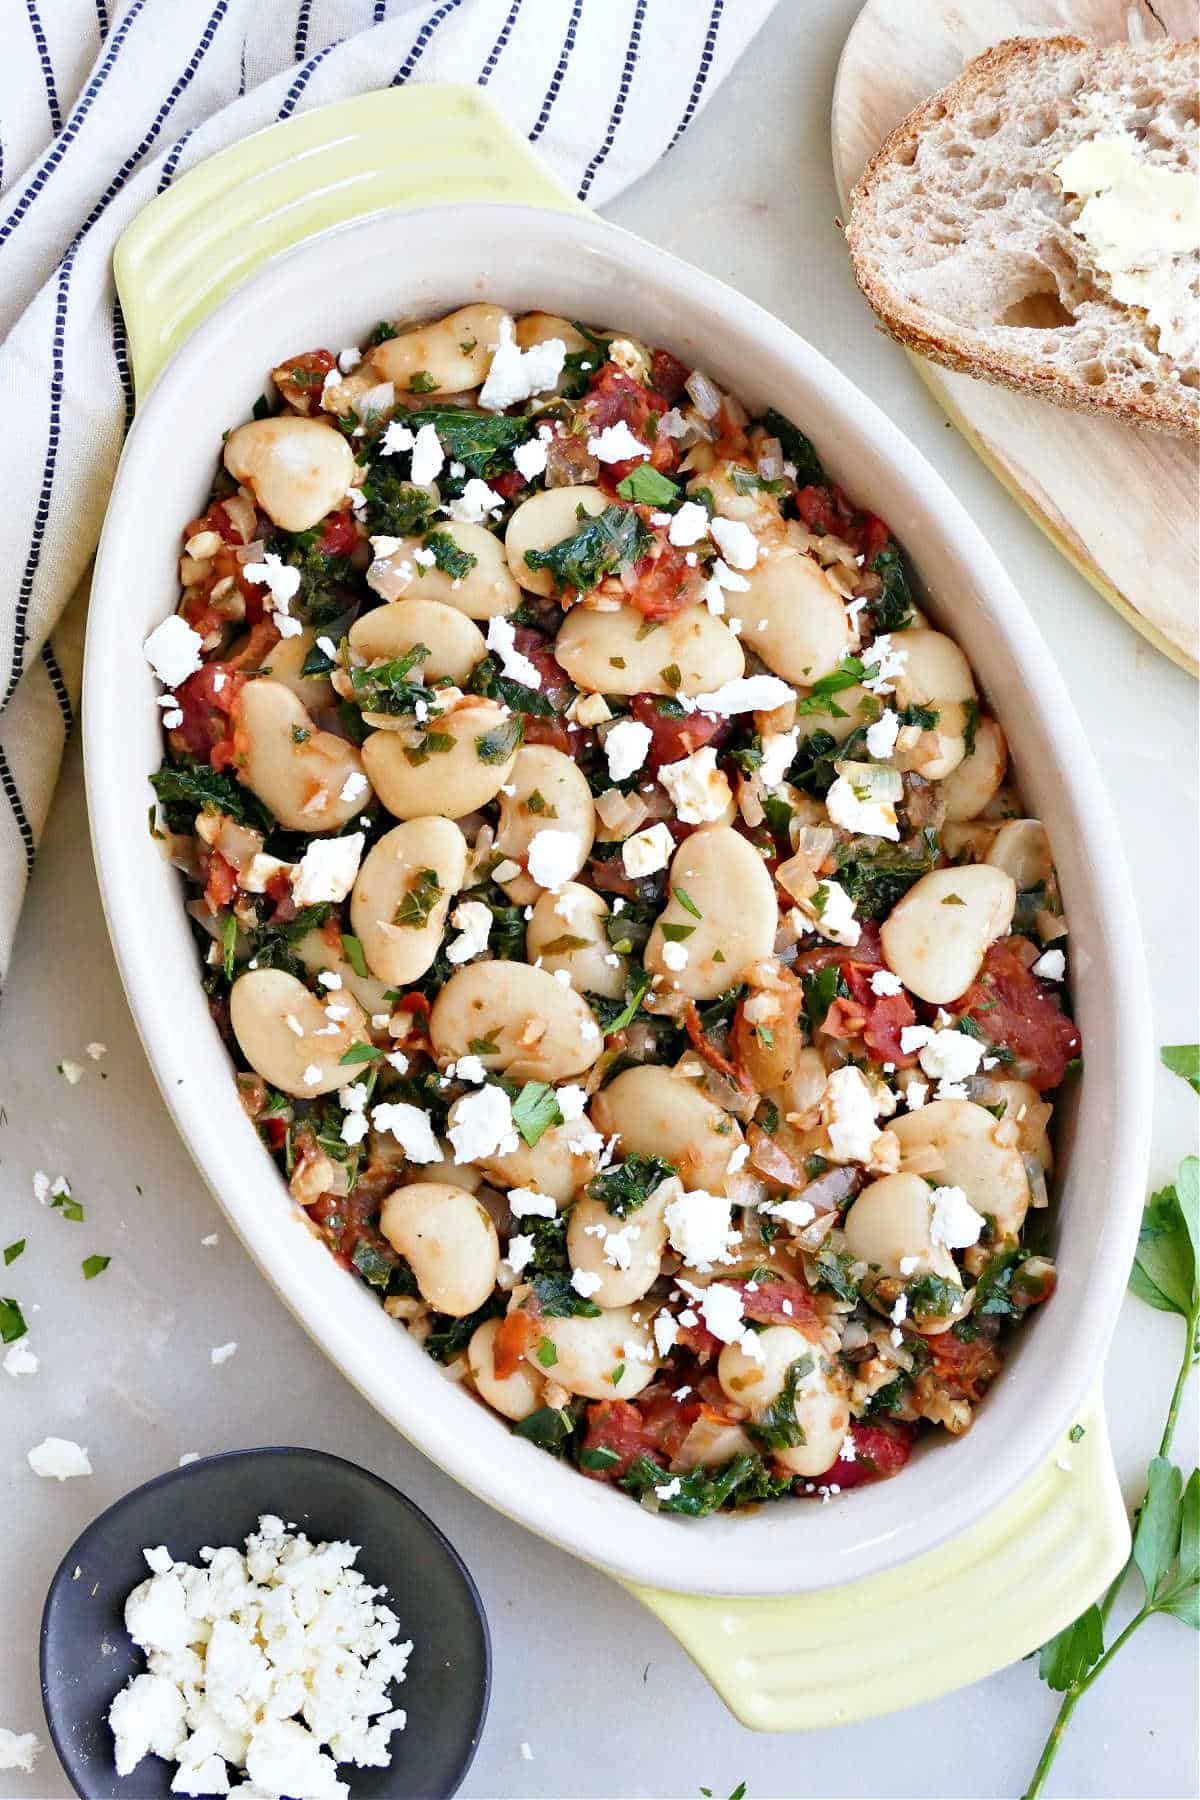 gigante beans with tomatoes, kale, and feta in an oval serving dish on a counter